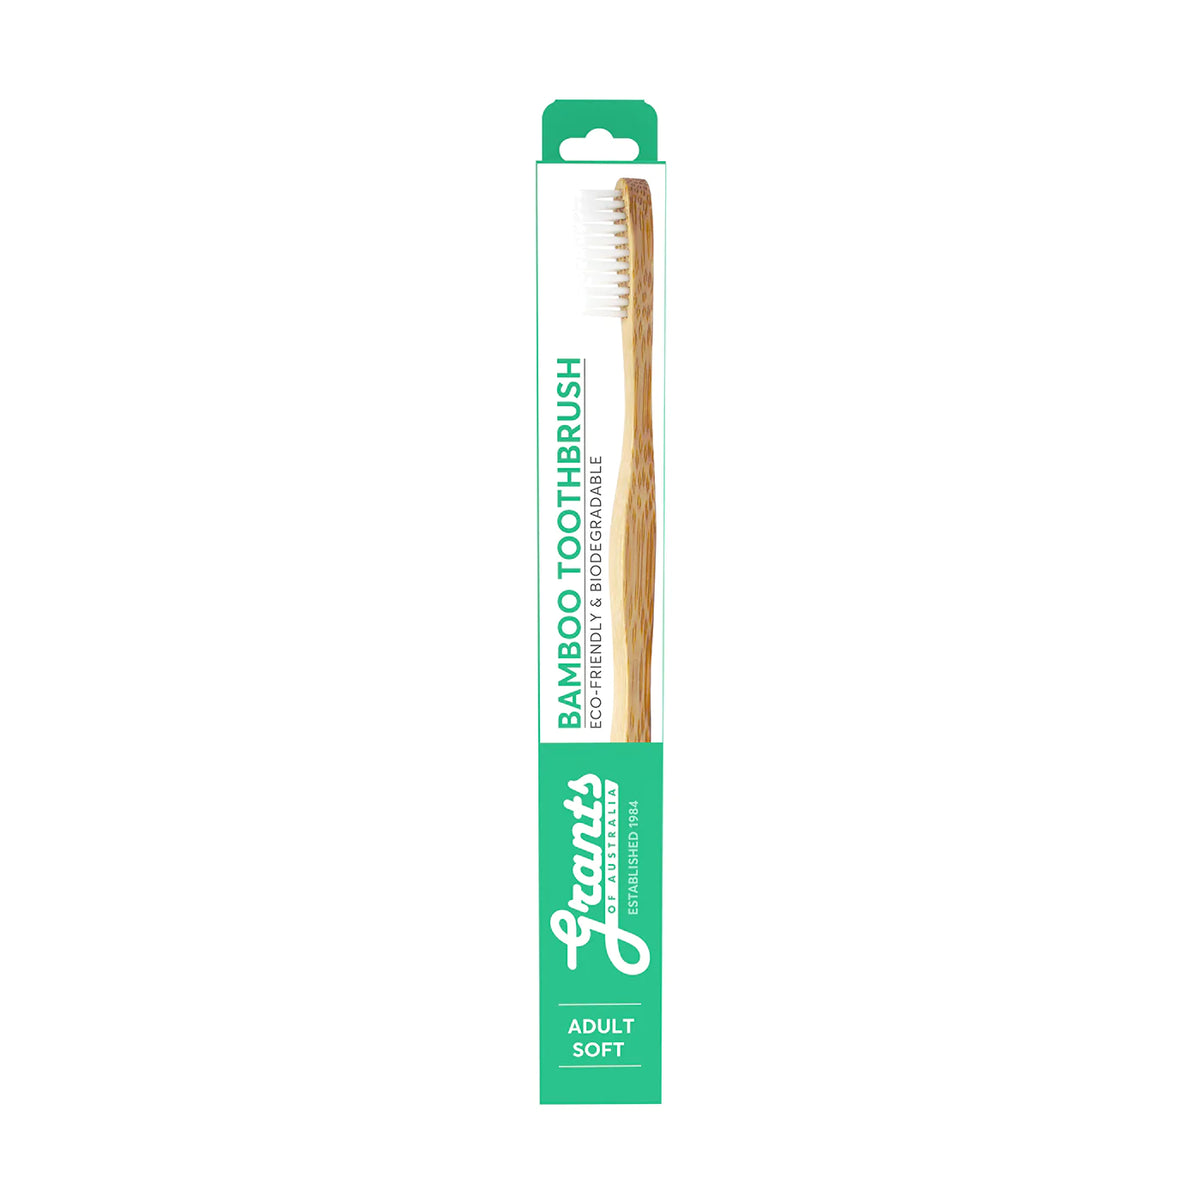 Grants Adult Bamboo Toothbrush Soft